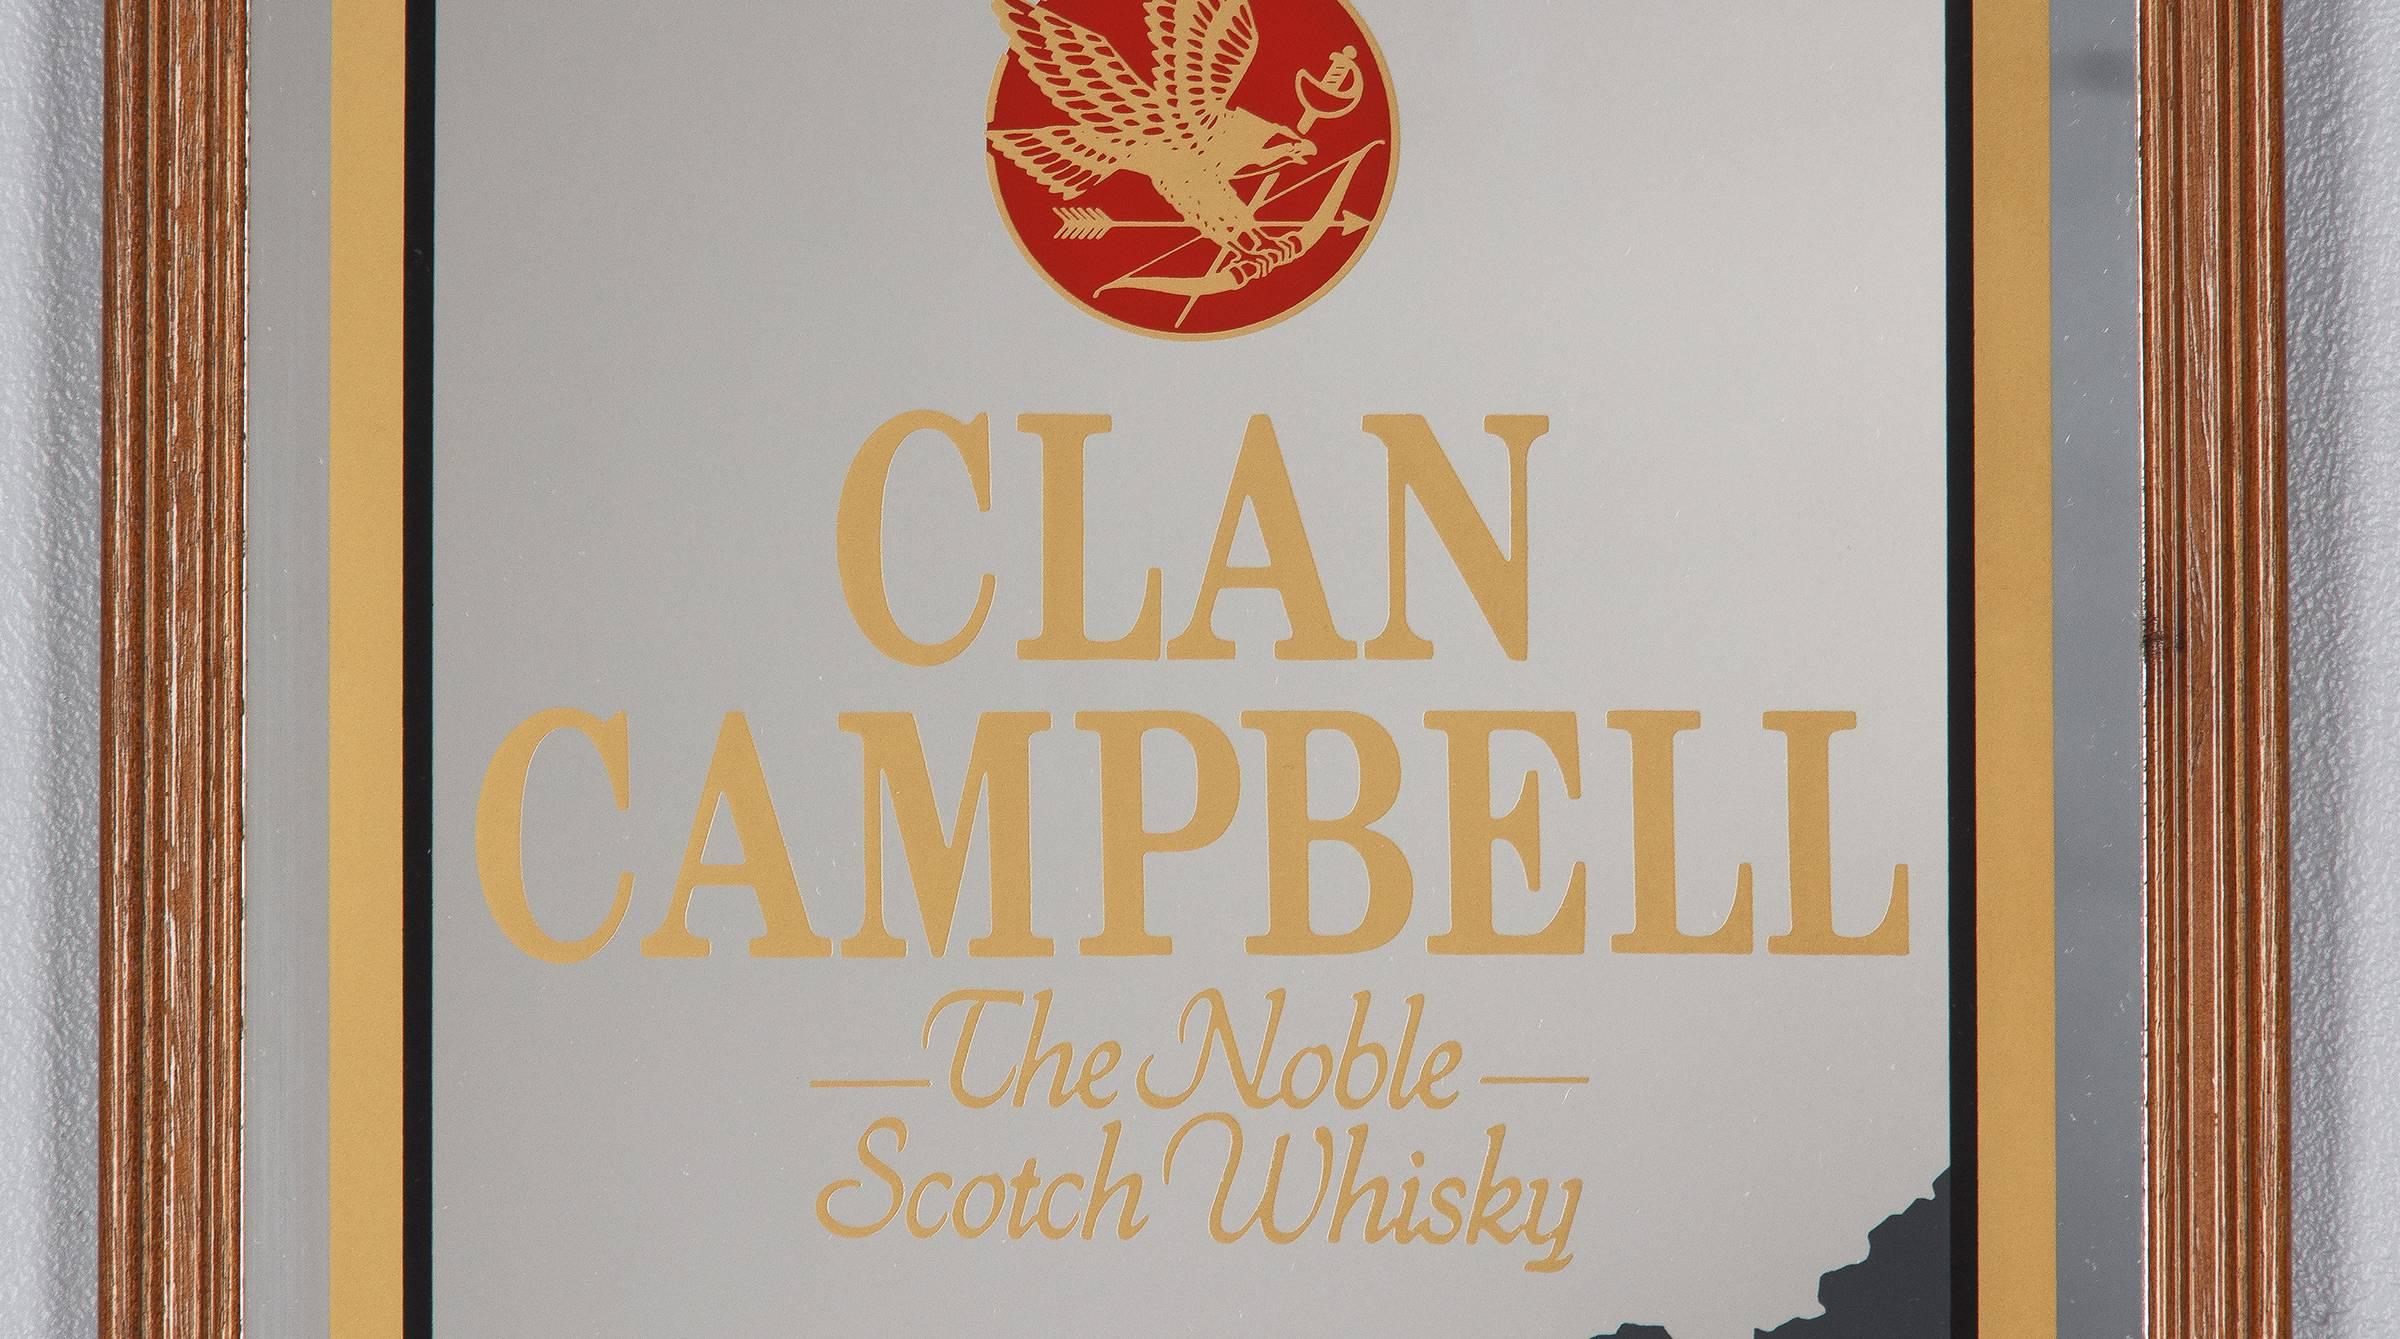 French Vintage Frame with Mirrored Advertising Sign for Clan Campbell Scotch, 1980s